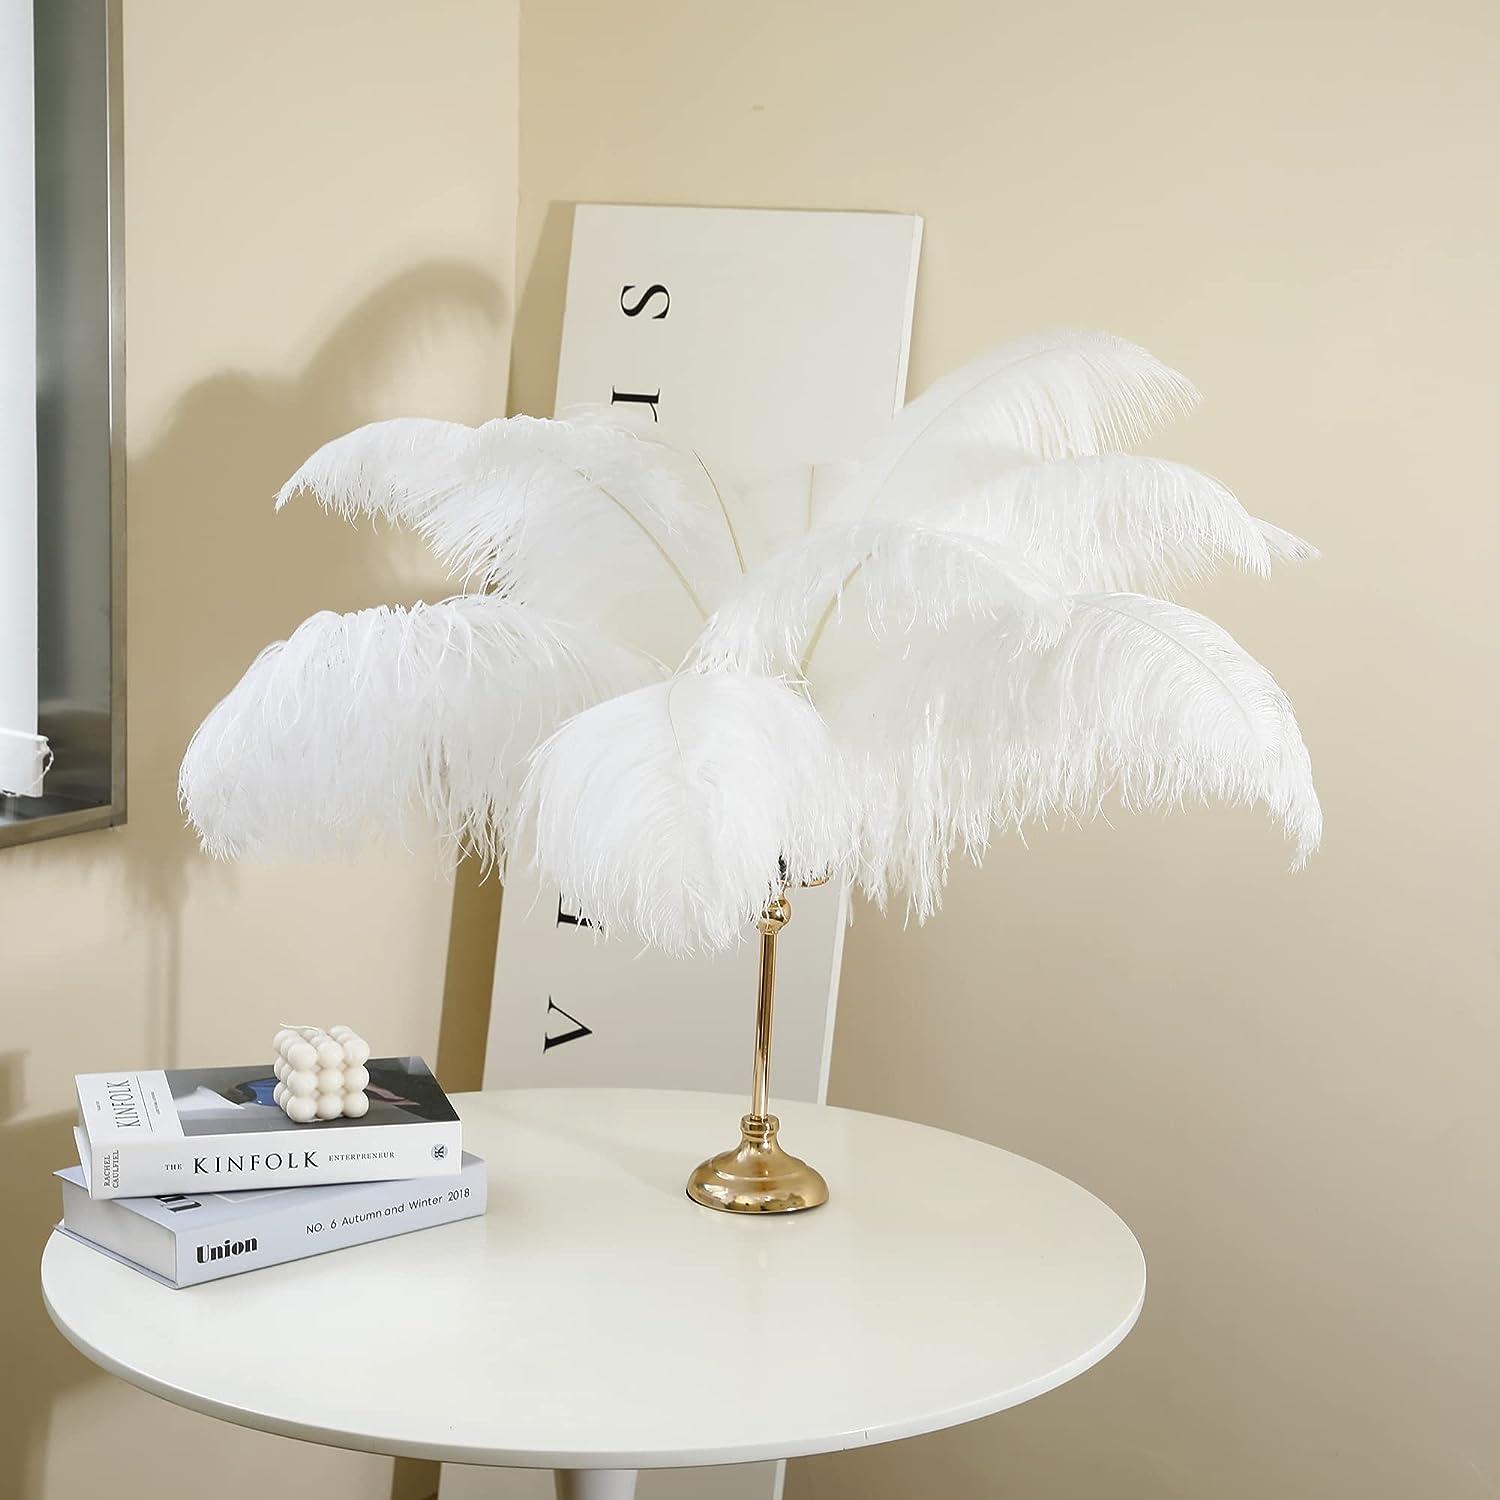 Larryhot White Large Ostrich Feathers - 16-18 inch 10pcs Feathers for Vase  Wedding Party Centerpieces and Home Decorations (White)